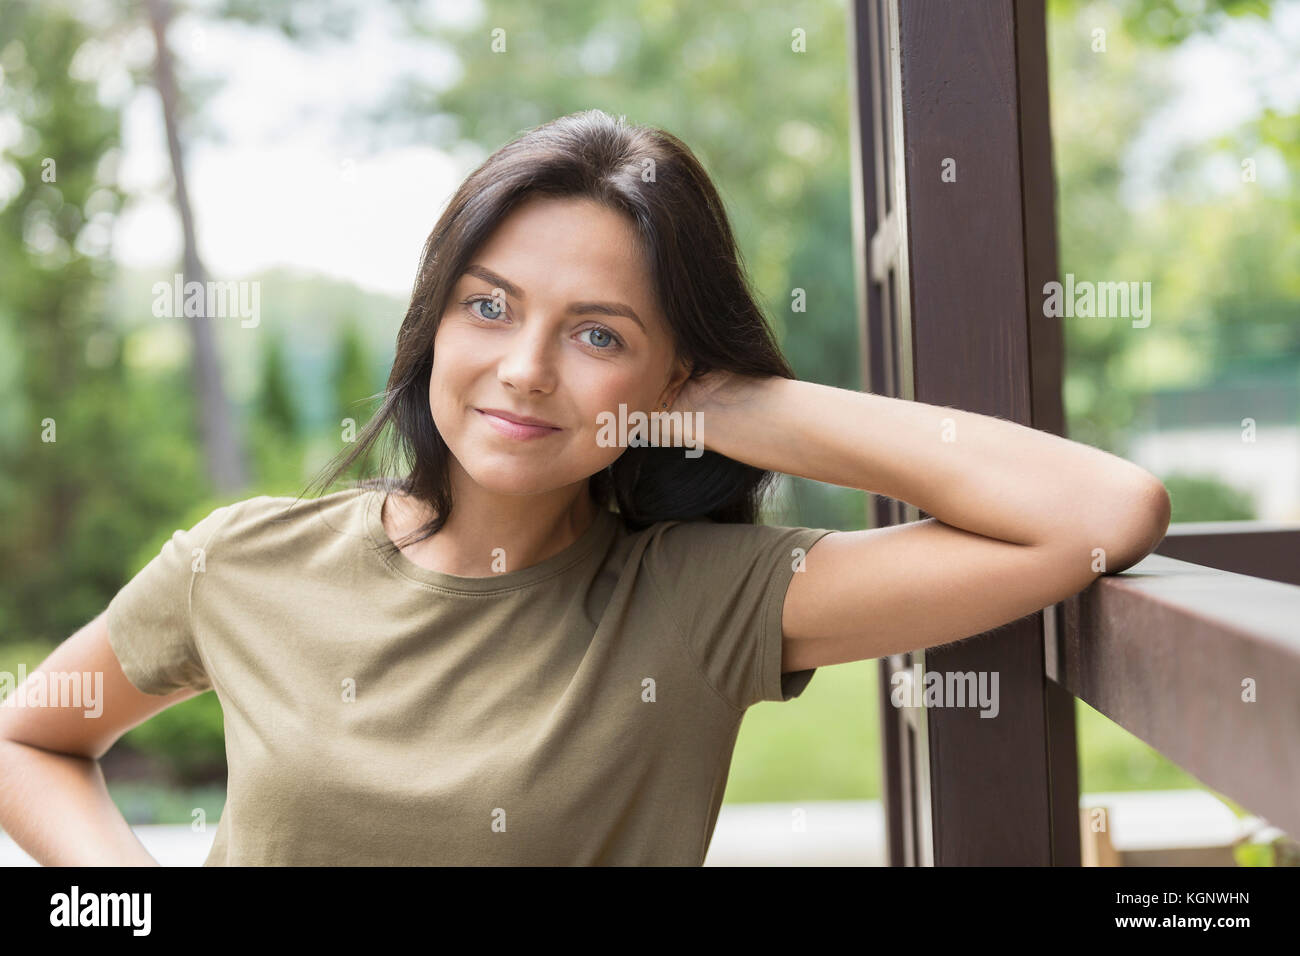 Portrait of smiling woman leaning on railing at yard Stock Photo